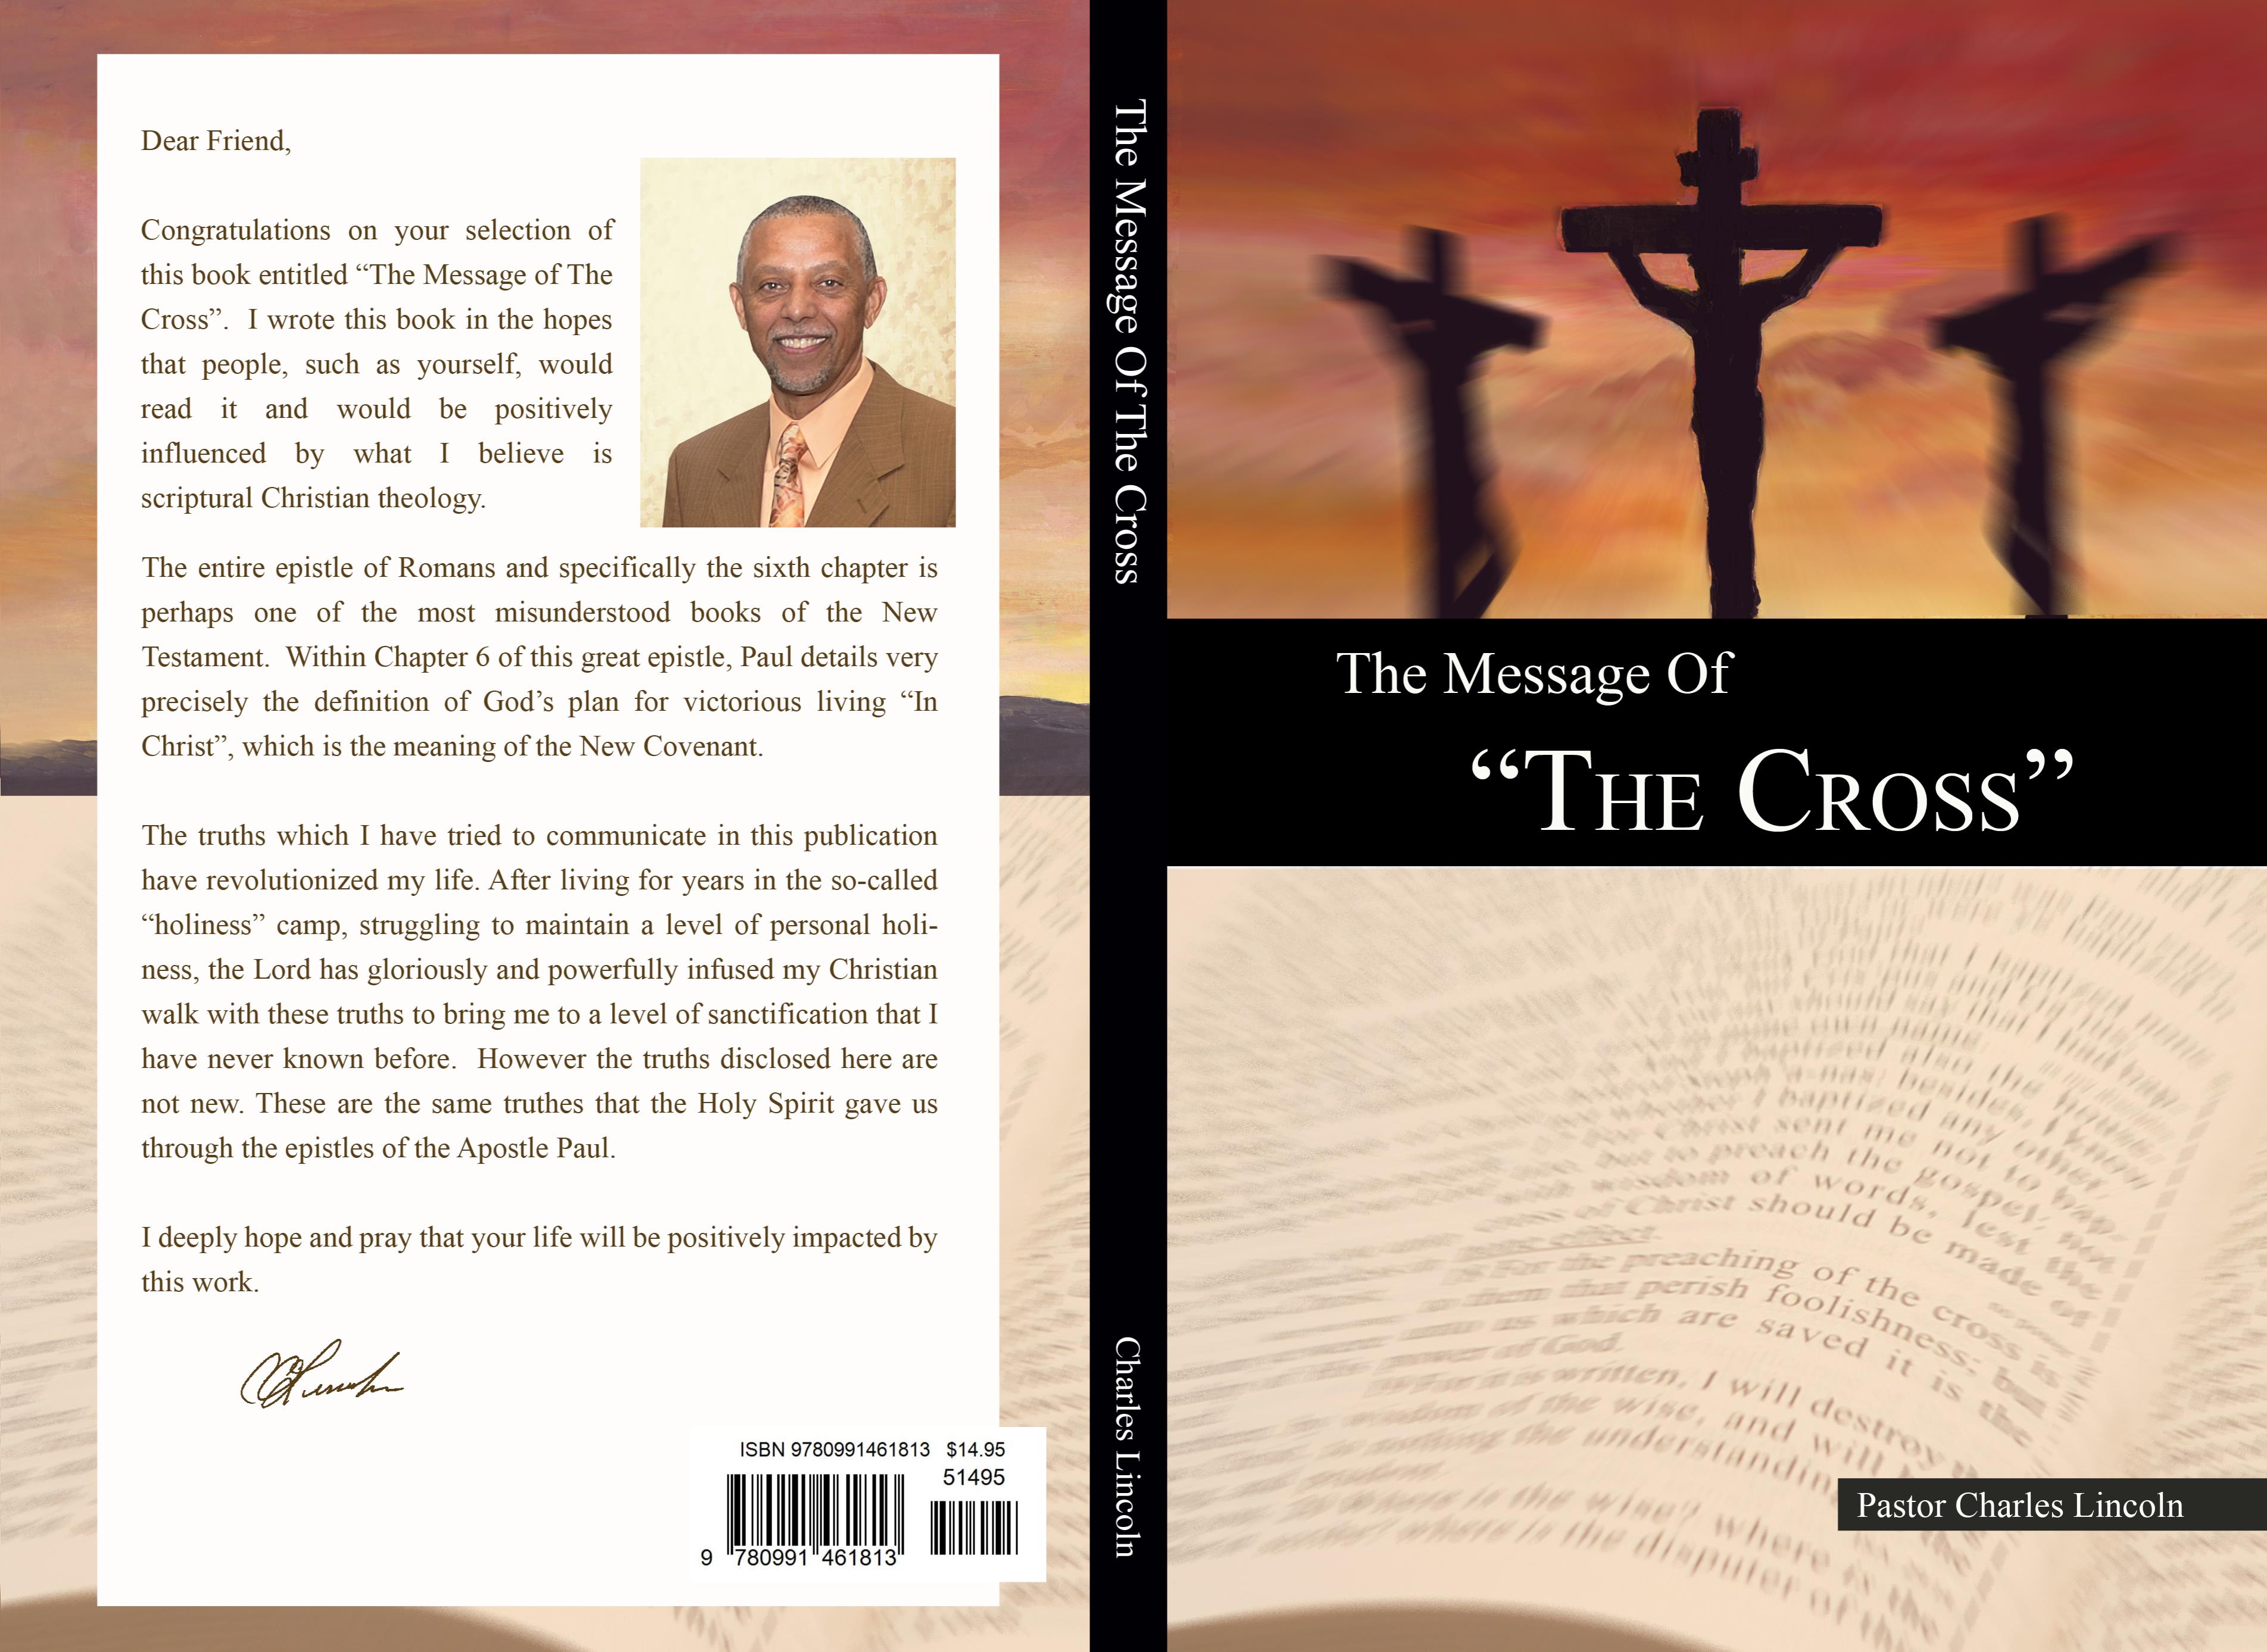 The Message of the Cross cover image